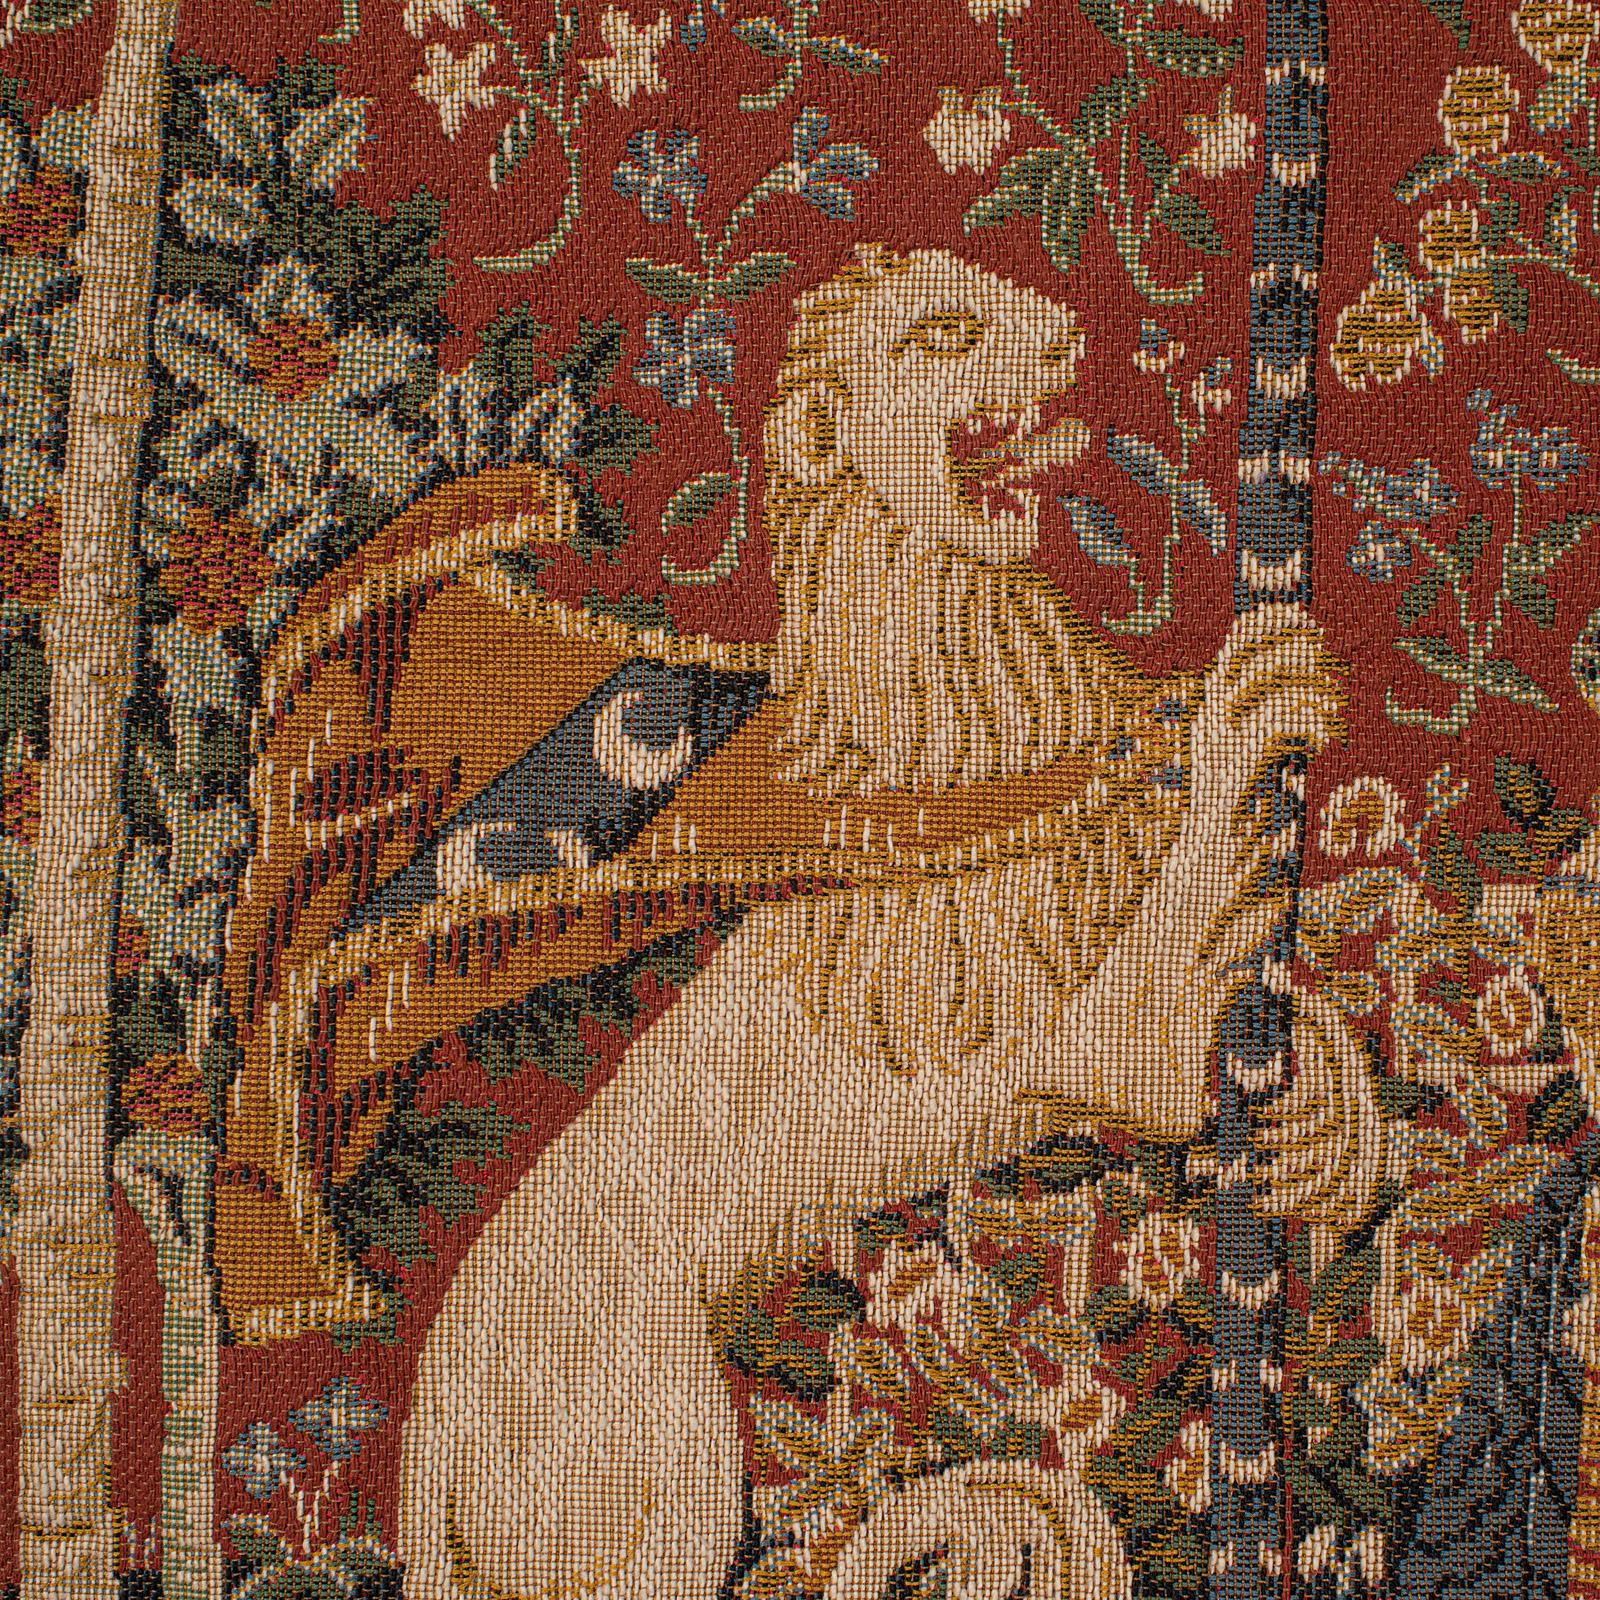 Textile Vintage Tapestry, French, Needlepoint, the Lady and the Unicorn, the Taste, 1980